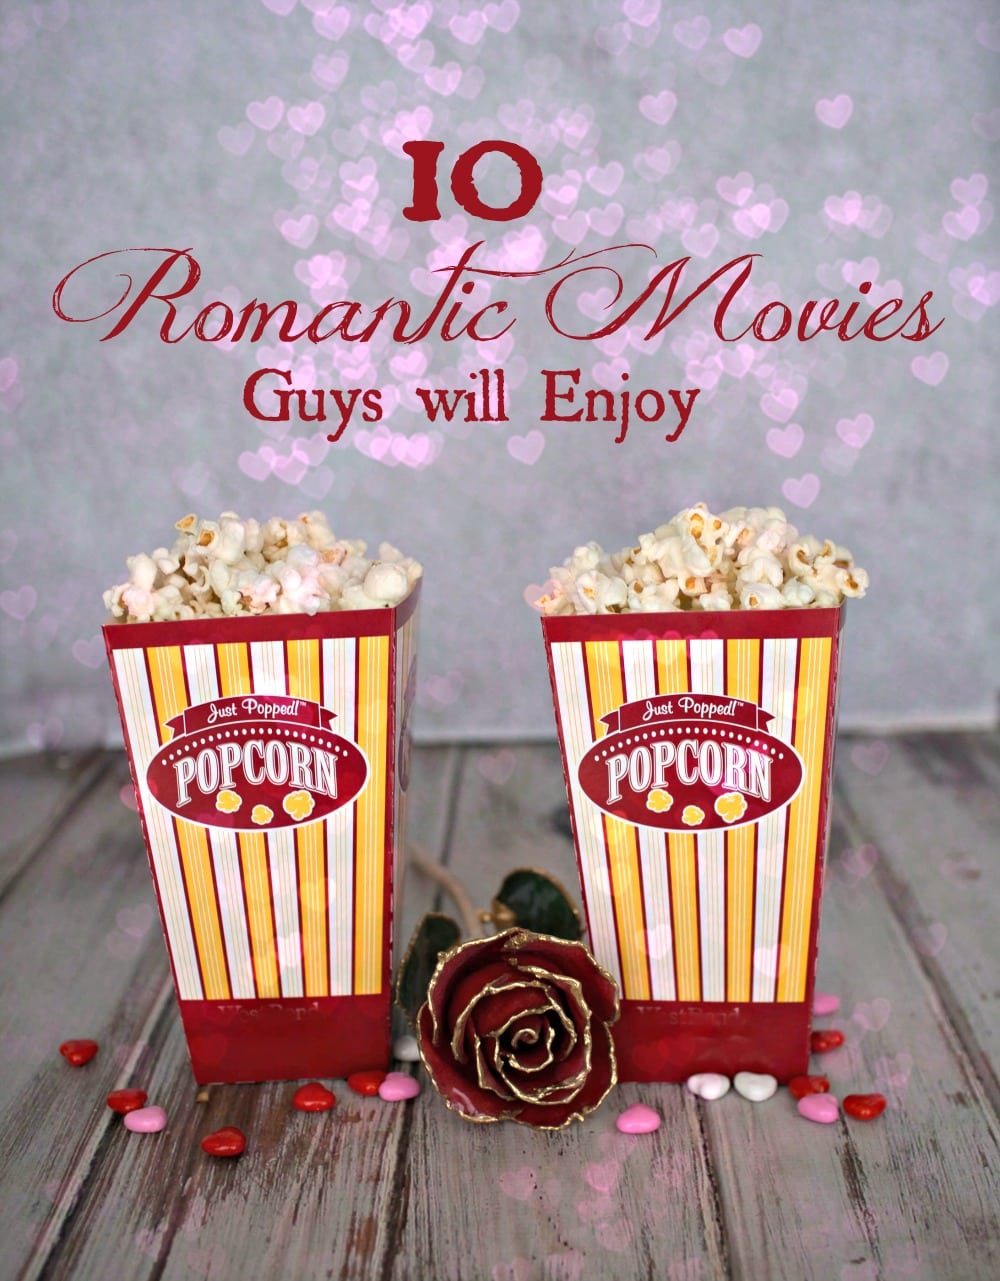 10 Romantic Movies Guys Will Enjoy - Guys want a romance movie that has comedy or action, not a tear jerker! Here are 10 romantic movies you can both enjoy watching.